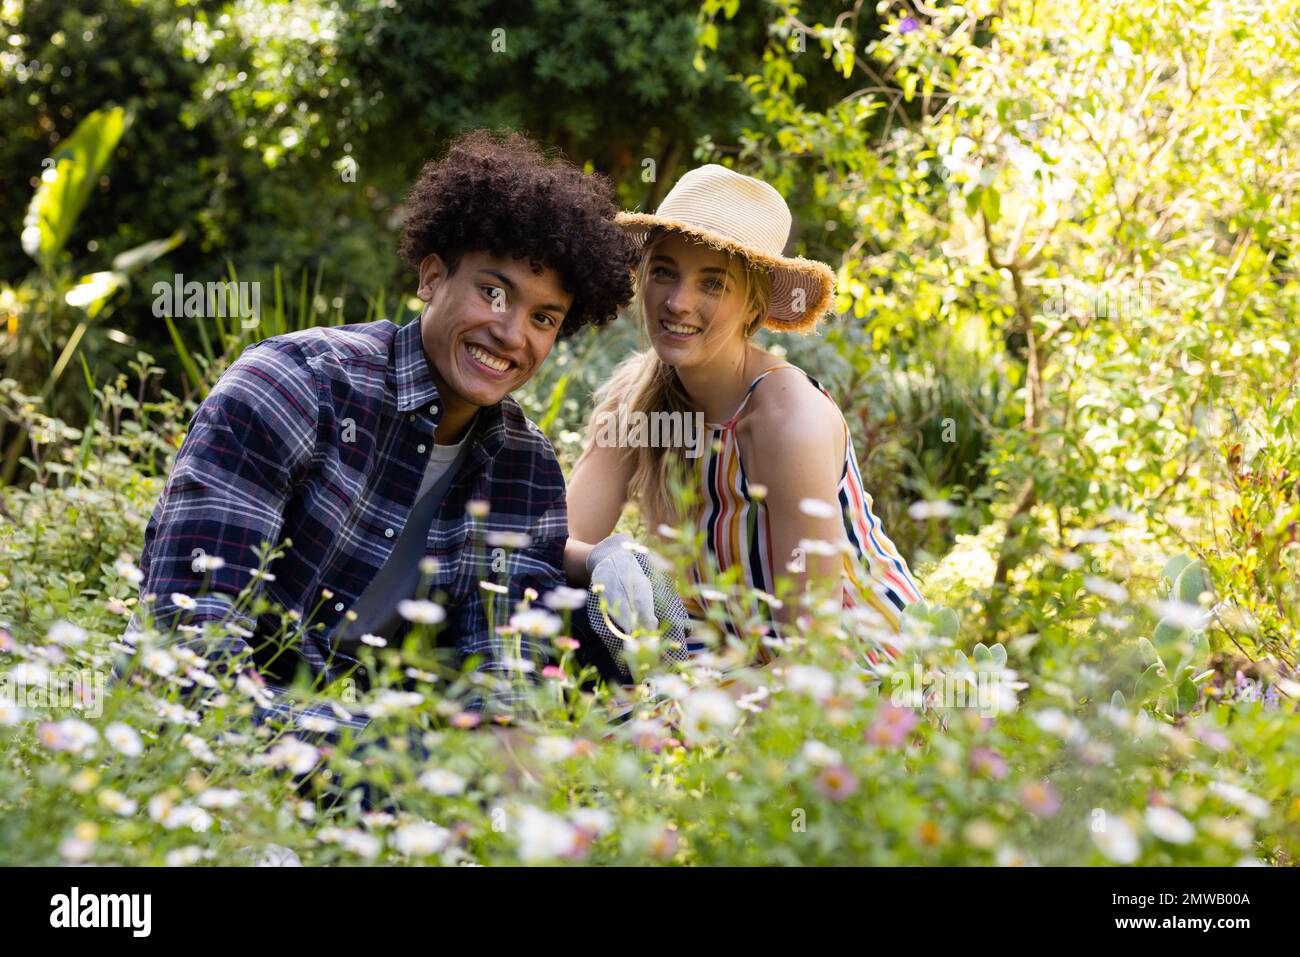 Portrait of happy diverse couple gardening, sitting amongst flowers in sunny garden Stock Photo